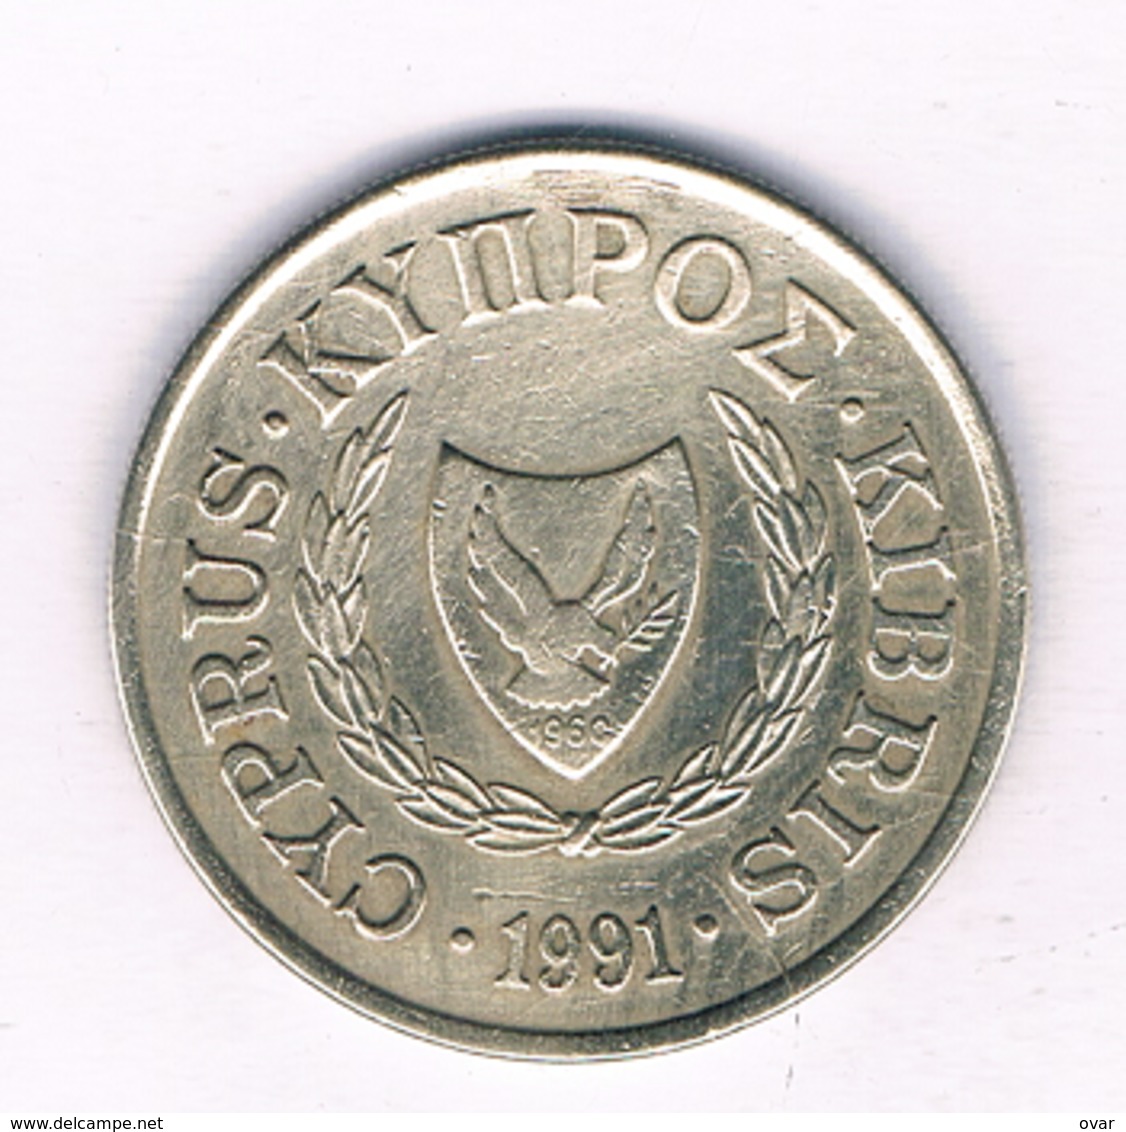 10 CENTS  1991  CYPRUS /5546/ - Chypre